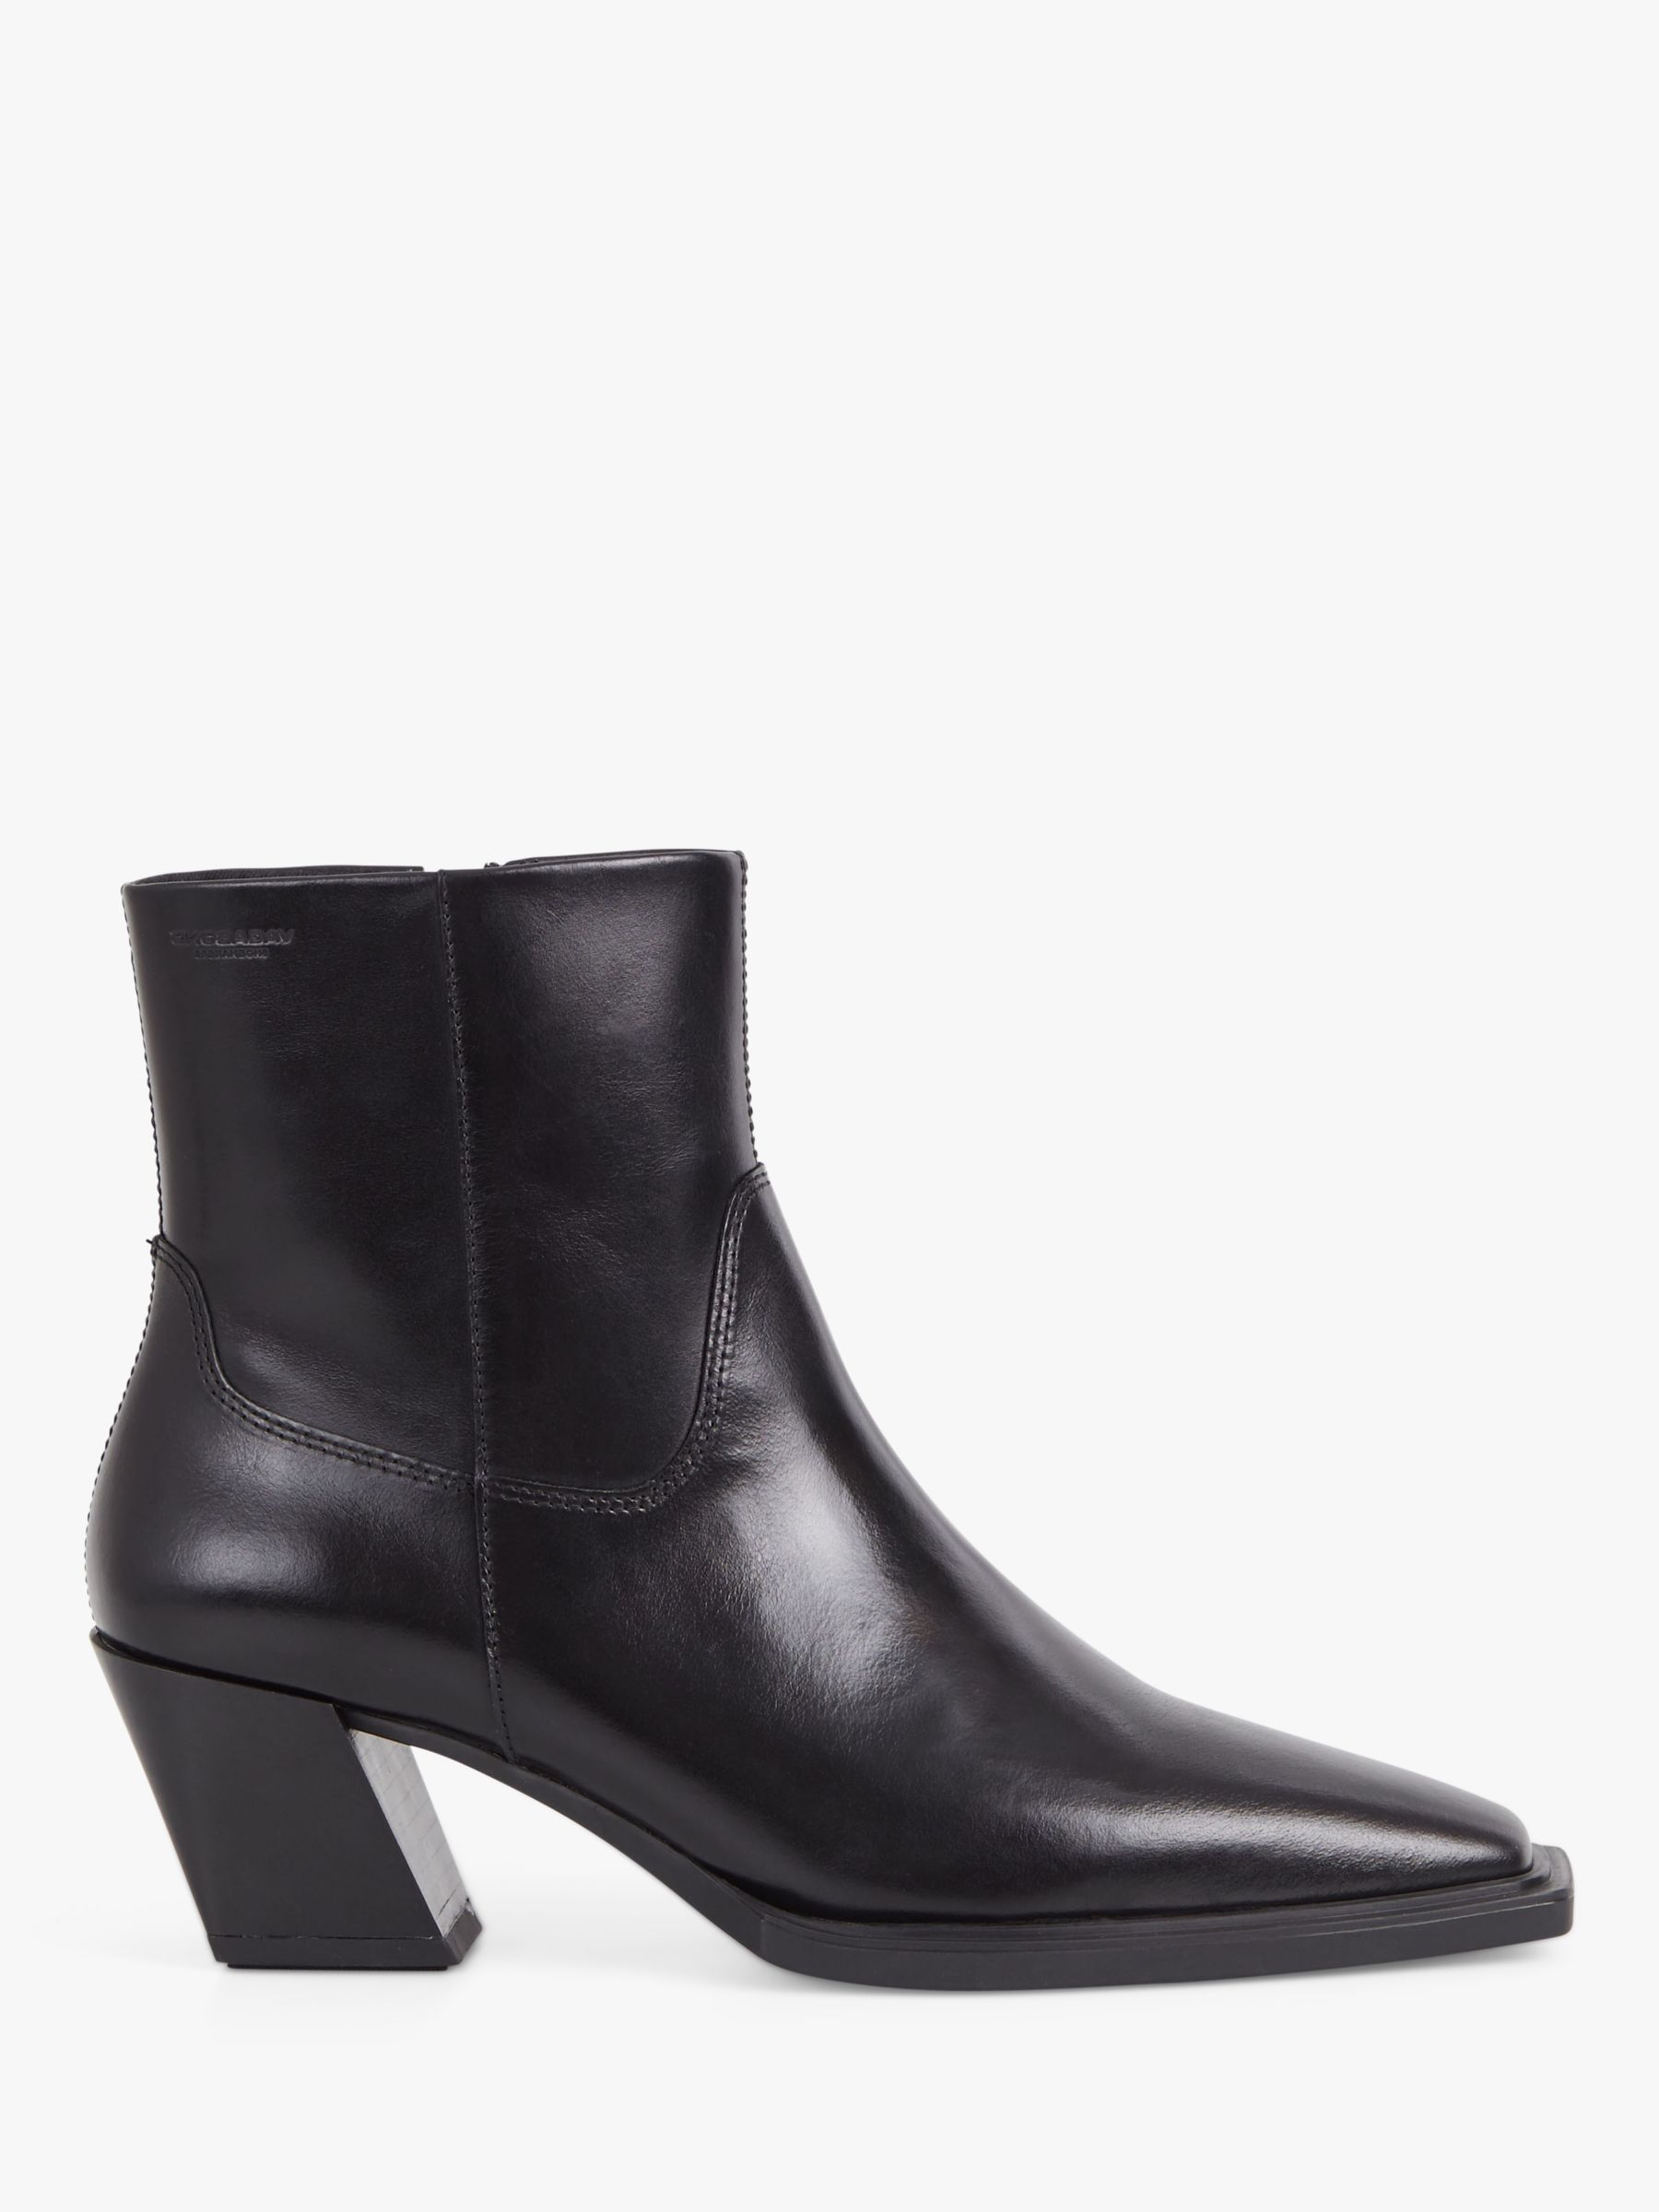 Vagabond Shoemakers Alina Modern Leather Western Ankle Boots, Black at ...